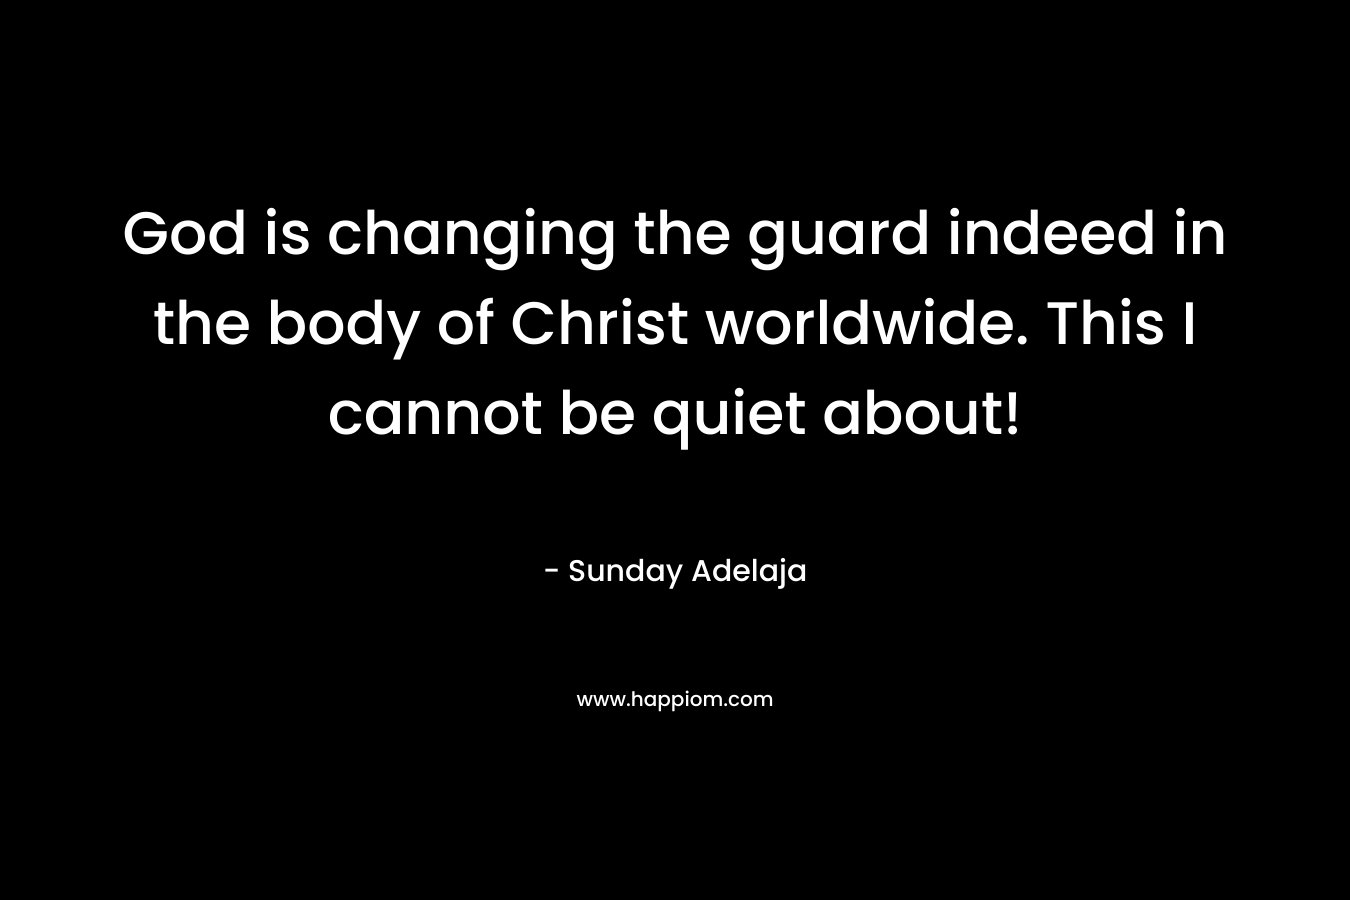 God is changing the guard indeed in the body of Christ worldwide. This I cannot be quiet about! – Sunday Adelaja